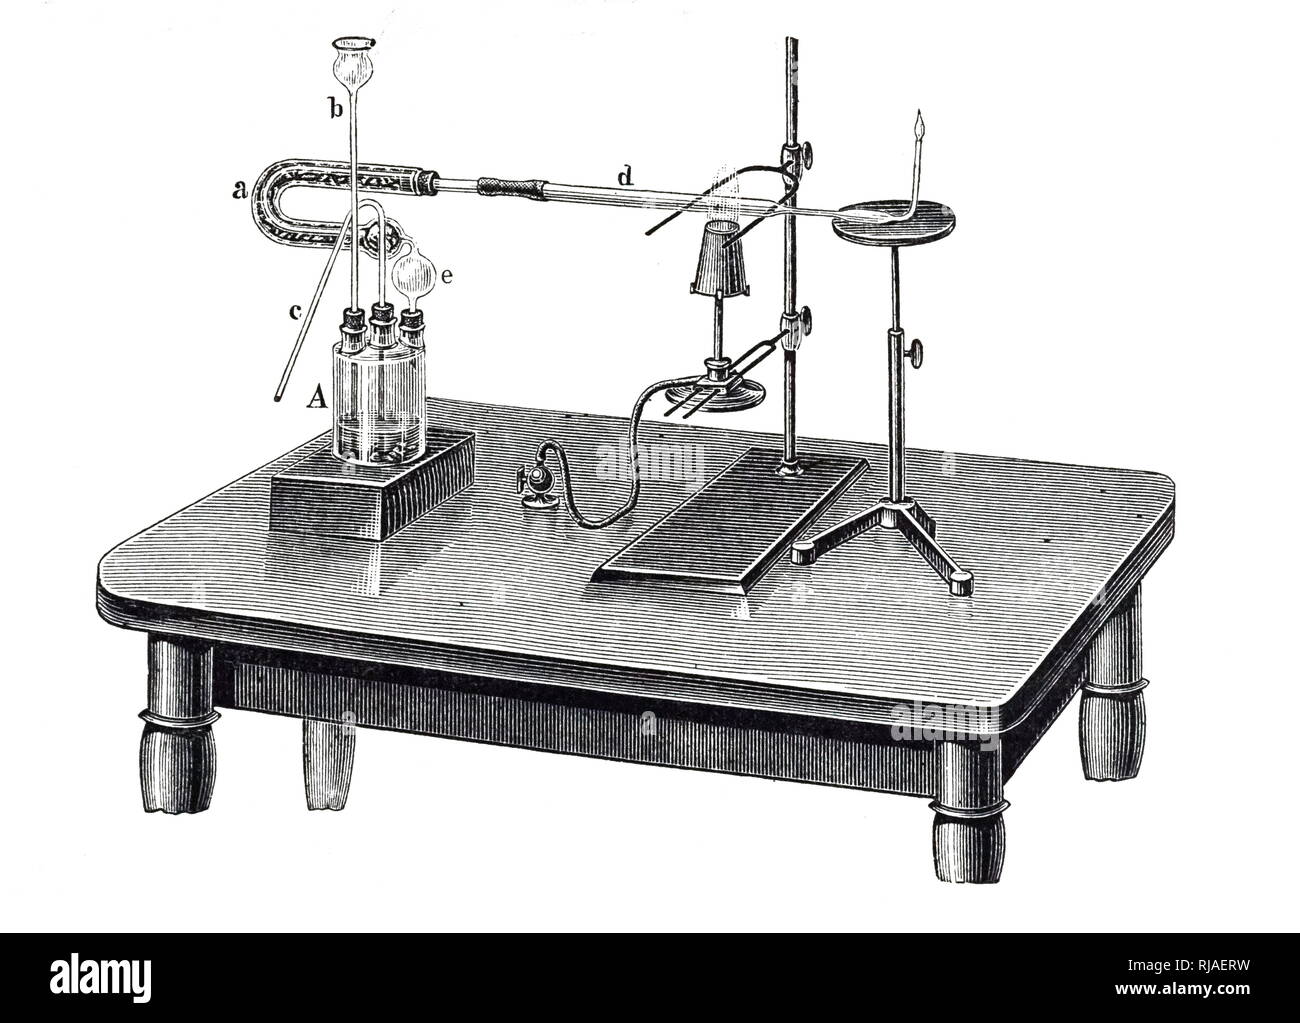 An engraving depicting Otto Rosenheim's apparatus for testing arsenic in the contents of the stomach by Marsh's reaction. Otto Rosenheim (1871-1955) a German Biochemist. Dated 19th century Stock Photo